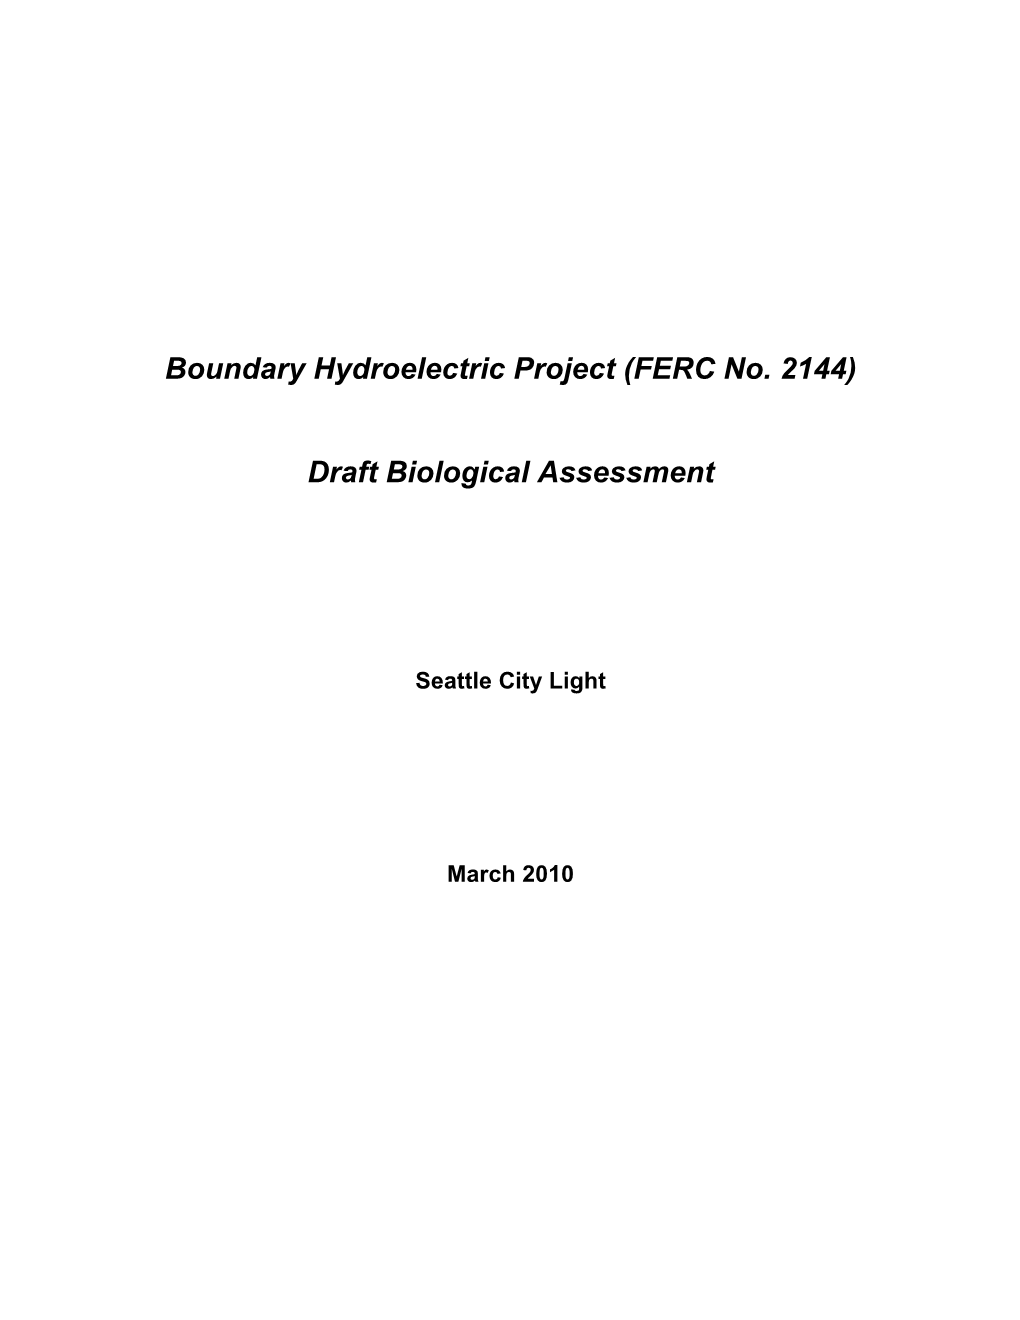 Boundary Hydroelectric Project (FERC No. 2144) Draft Biological